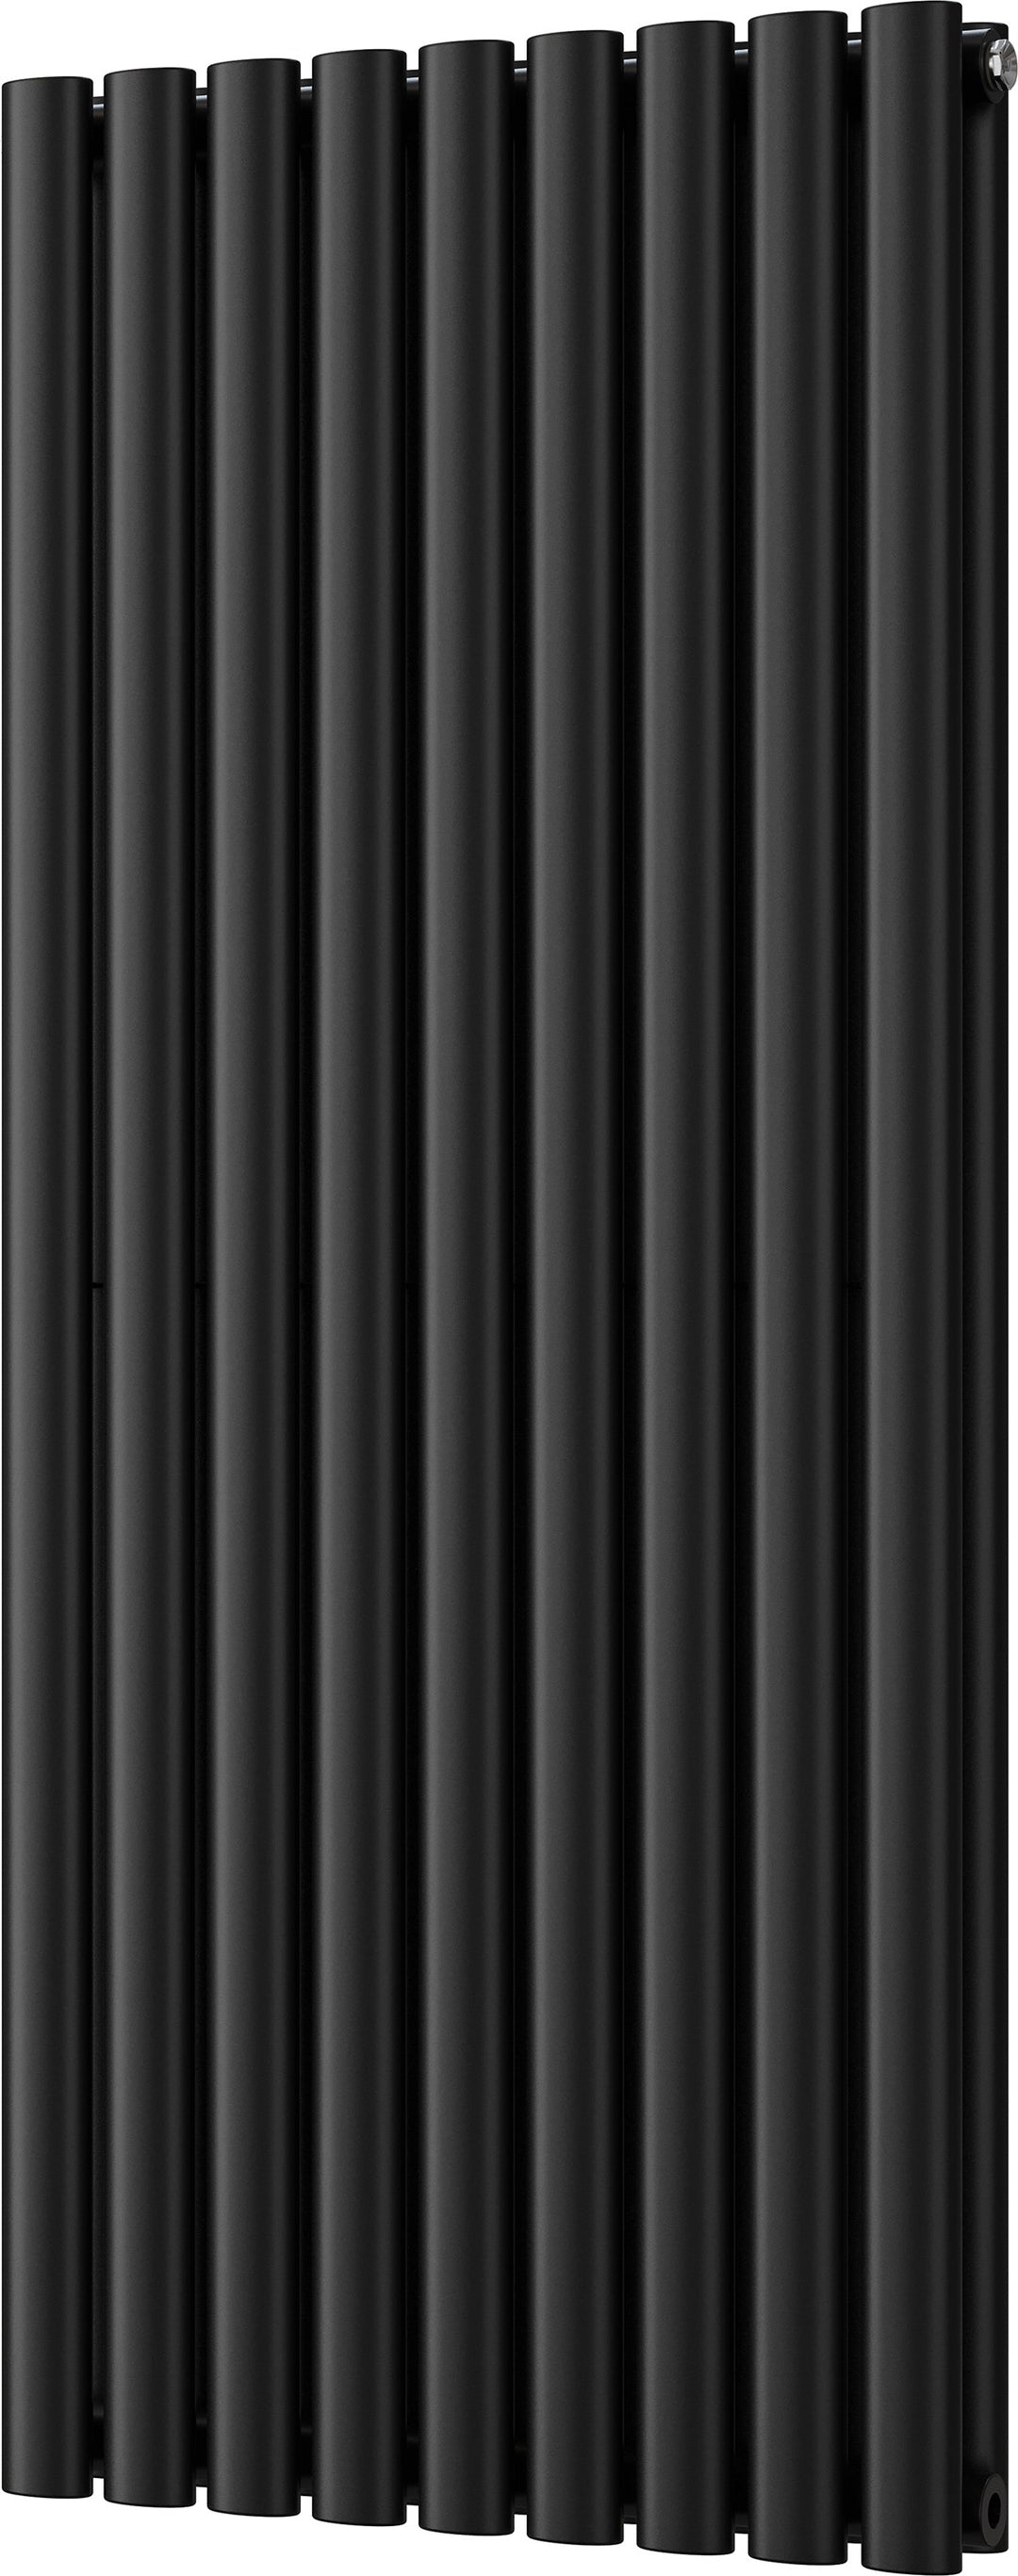 Omeara - Black Vertical Radiator H1200mm x W522mm Double Panel